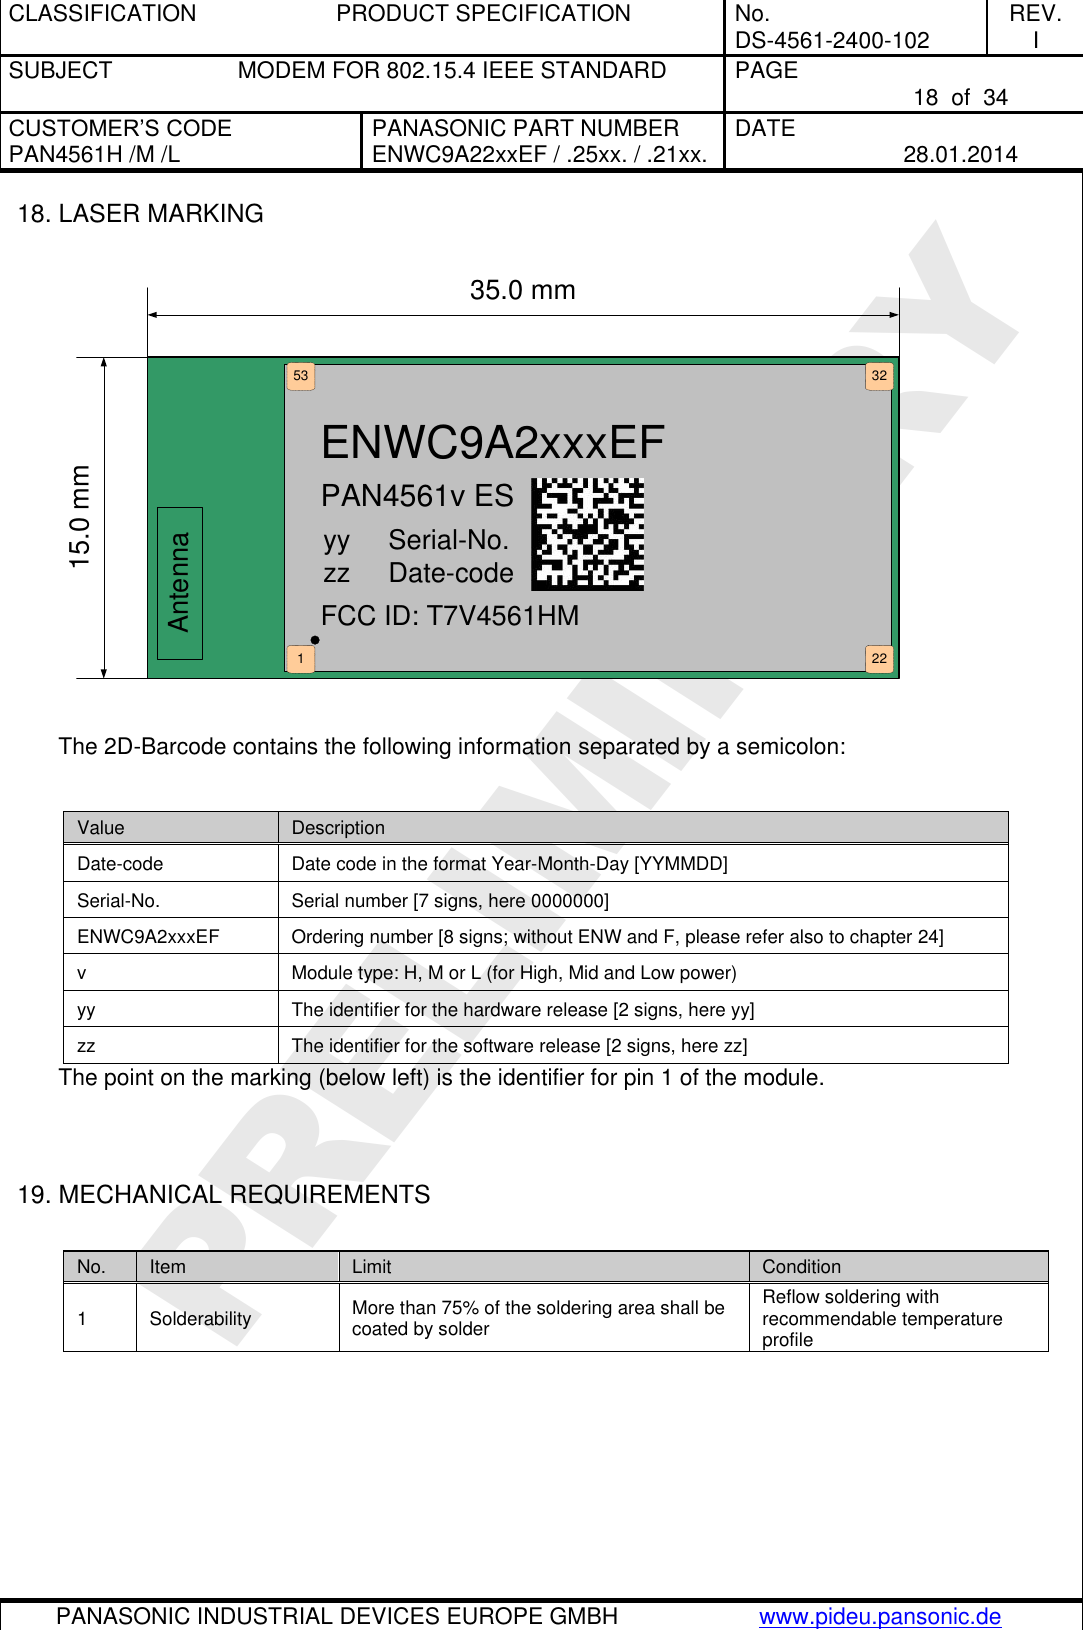 CLASSIFICATION  PRODUCT SPECIFICATION  No. DS-4561-2400-102 REV. I SUBJECT  MODEM FOR 802.15.4 IEEE STANDARD  PAGE   18  of  34 CUSTOMER’S CODE PAN4561H /M /L PANASONIC PART NUMBER ENWC9A22xxEF / .25xx. / .21xx. DATE   28.01.2014   PANASONIC INDUSTRIAL DEVICES EUROPE GMBH www.pideu.pansonic.de  PRELIMINARY 18. LASER MARKING  Antenna35.0 mm15.0 mm2232531ENWC9A2xxxEFPAN4561v ESyy     Serial-No.zz     Date-codeFCC ID: T7V4561HM  The 2D-Barcode contains the following information separated by a semicolon:  Value Description Date-code Date code in the format Year-Month-Day [YYMMDD] Serial-No. Serial number [7 signs, here 0000000] ENWC9A2xxxEF Ordering number [8 signs; without ENW and F, please refer also to chapter 24] v Module type: H, M or L (for High, Mid and Low power) yy The identifier for the hardware release [2 signs, here yy] zz The identifier for the software release [2 signs, here zz] The point on the marking (below left) is the identifier for pin 1 of the module.   19. MECHANICAL REQUIREMENTS  No. Item Limit Condition 1 Solderability More than 75% of the soldering area shall be coated by solder Reflow soldering with recommendable temperature profile 